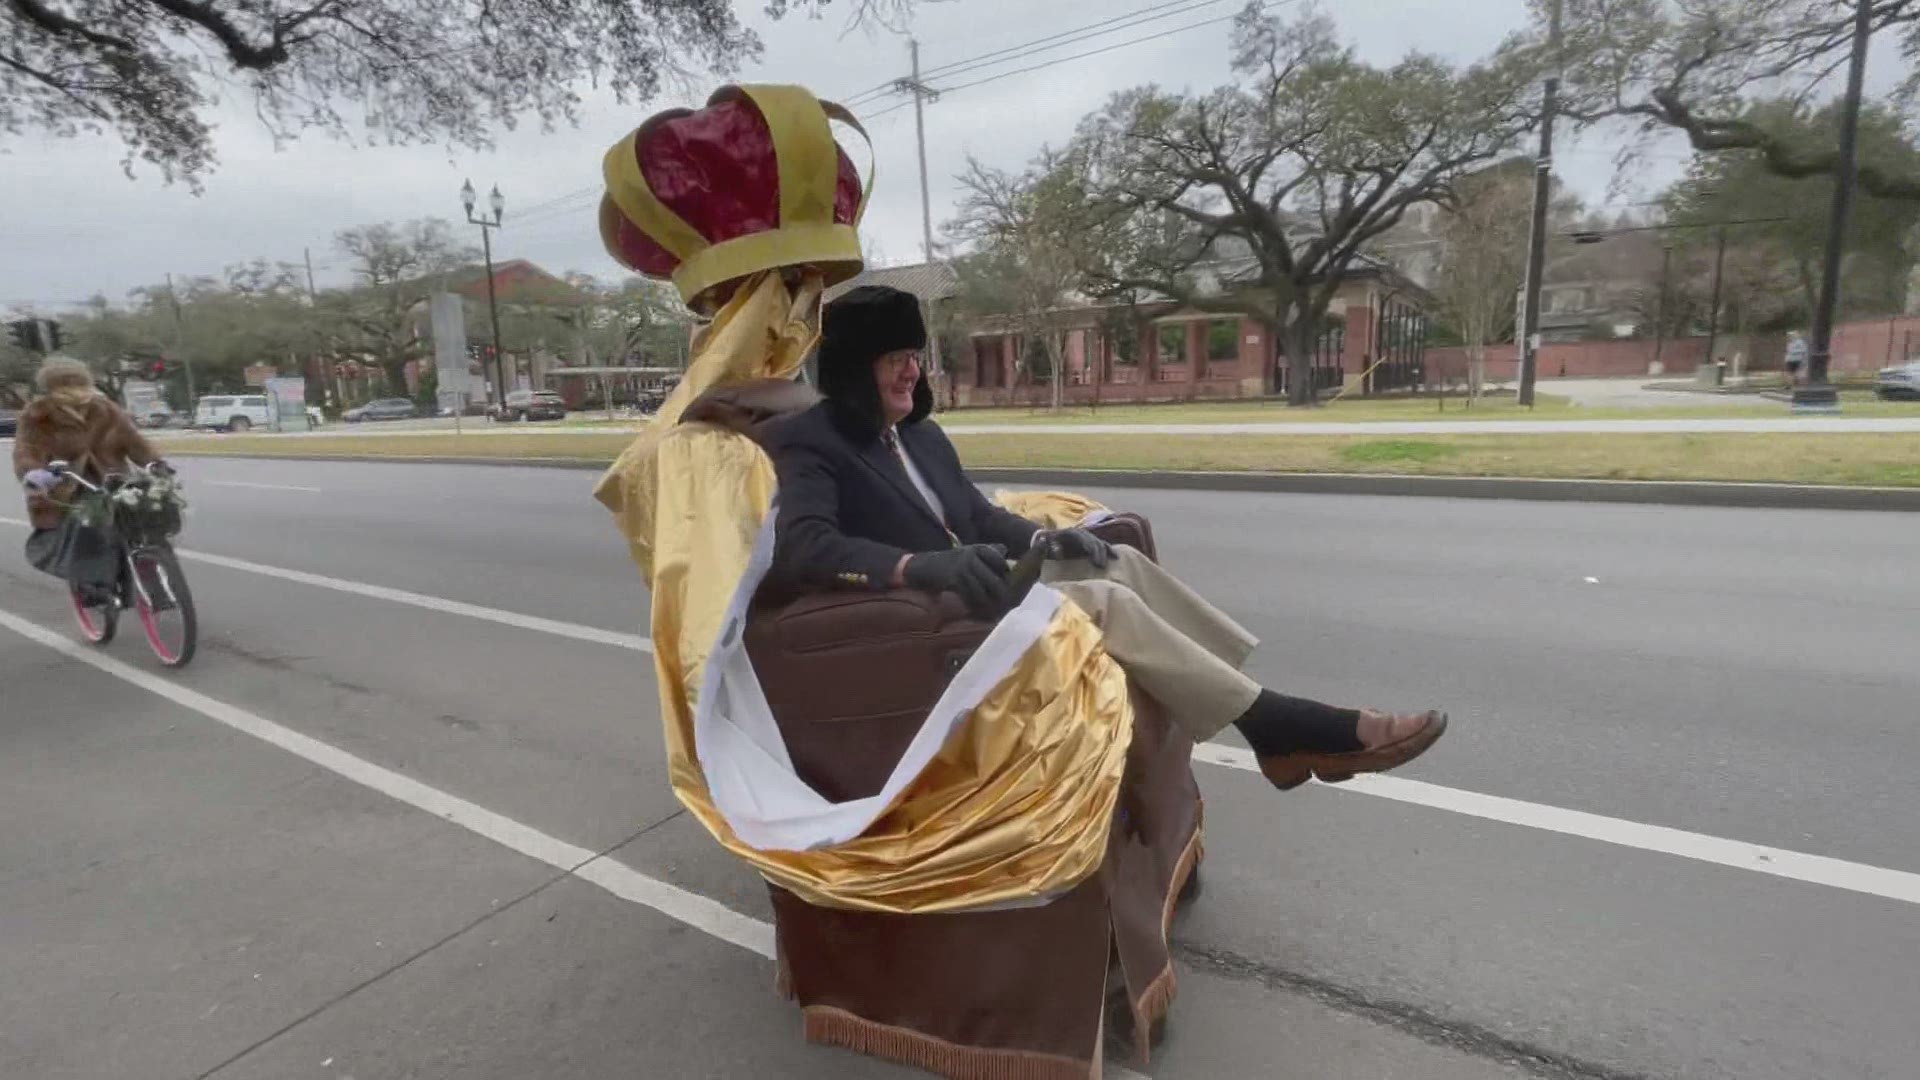 New Orleanians are trying hard to keep up Mardi Gras tradition during this very different time.